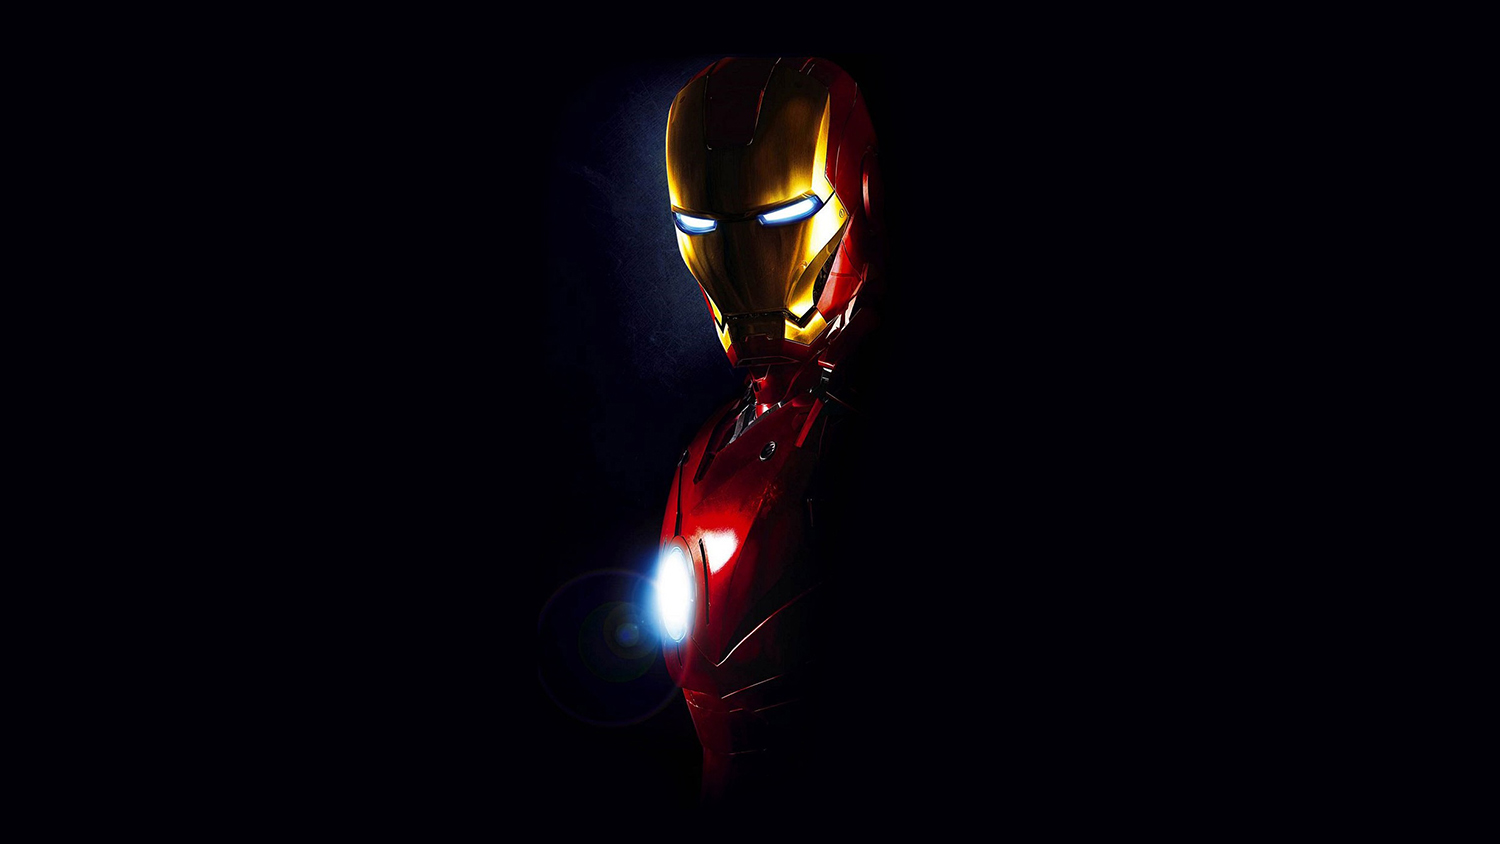 Description Download Iron Man high quality cell phone wallpaper for